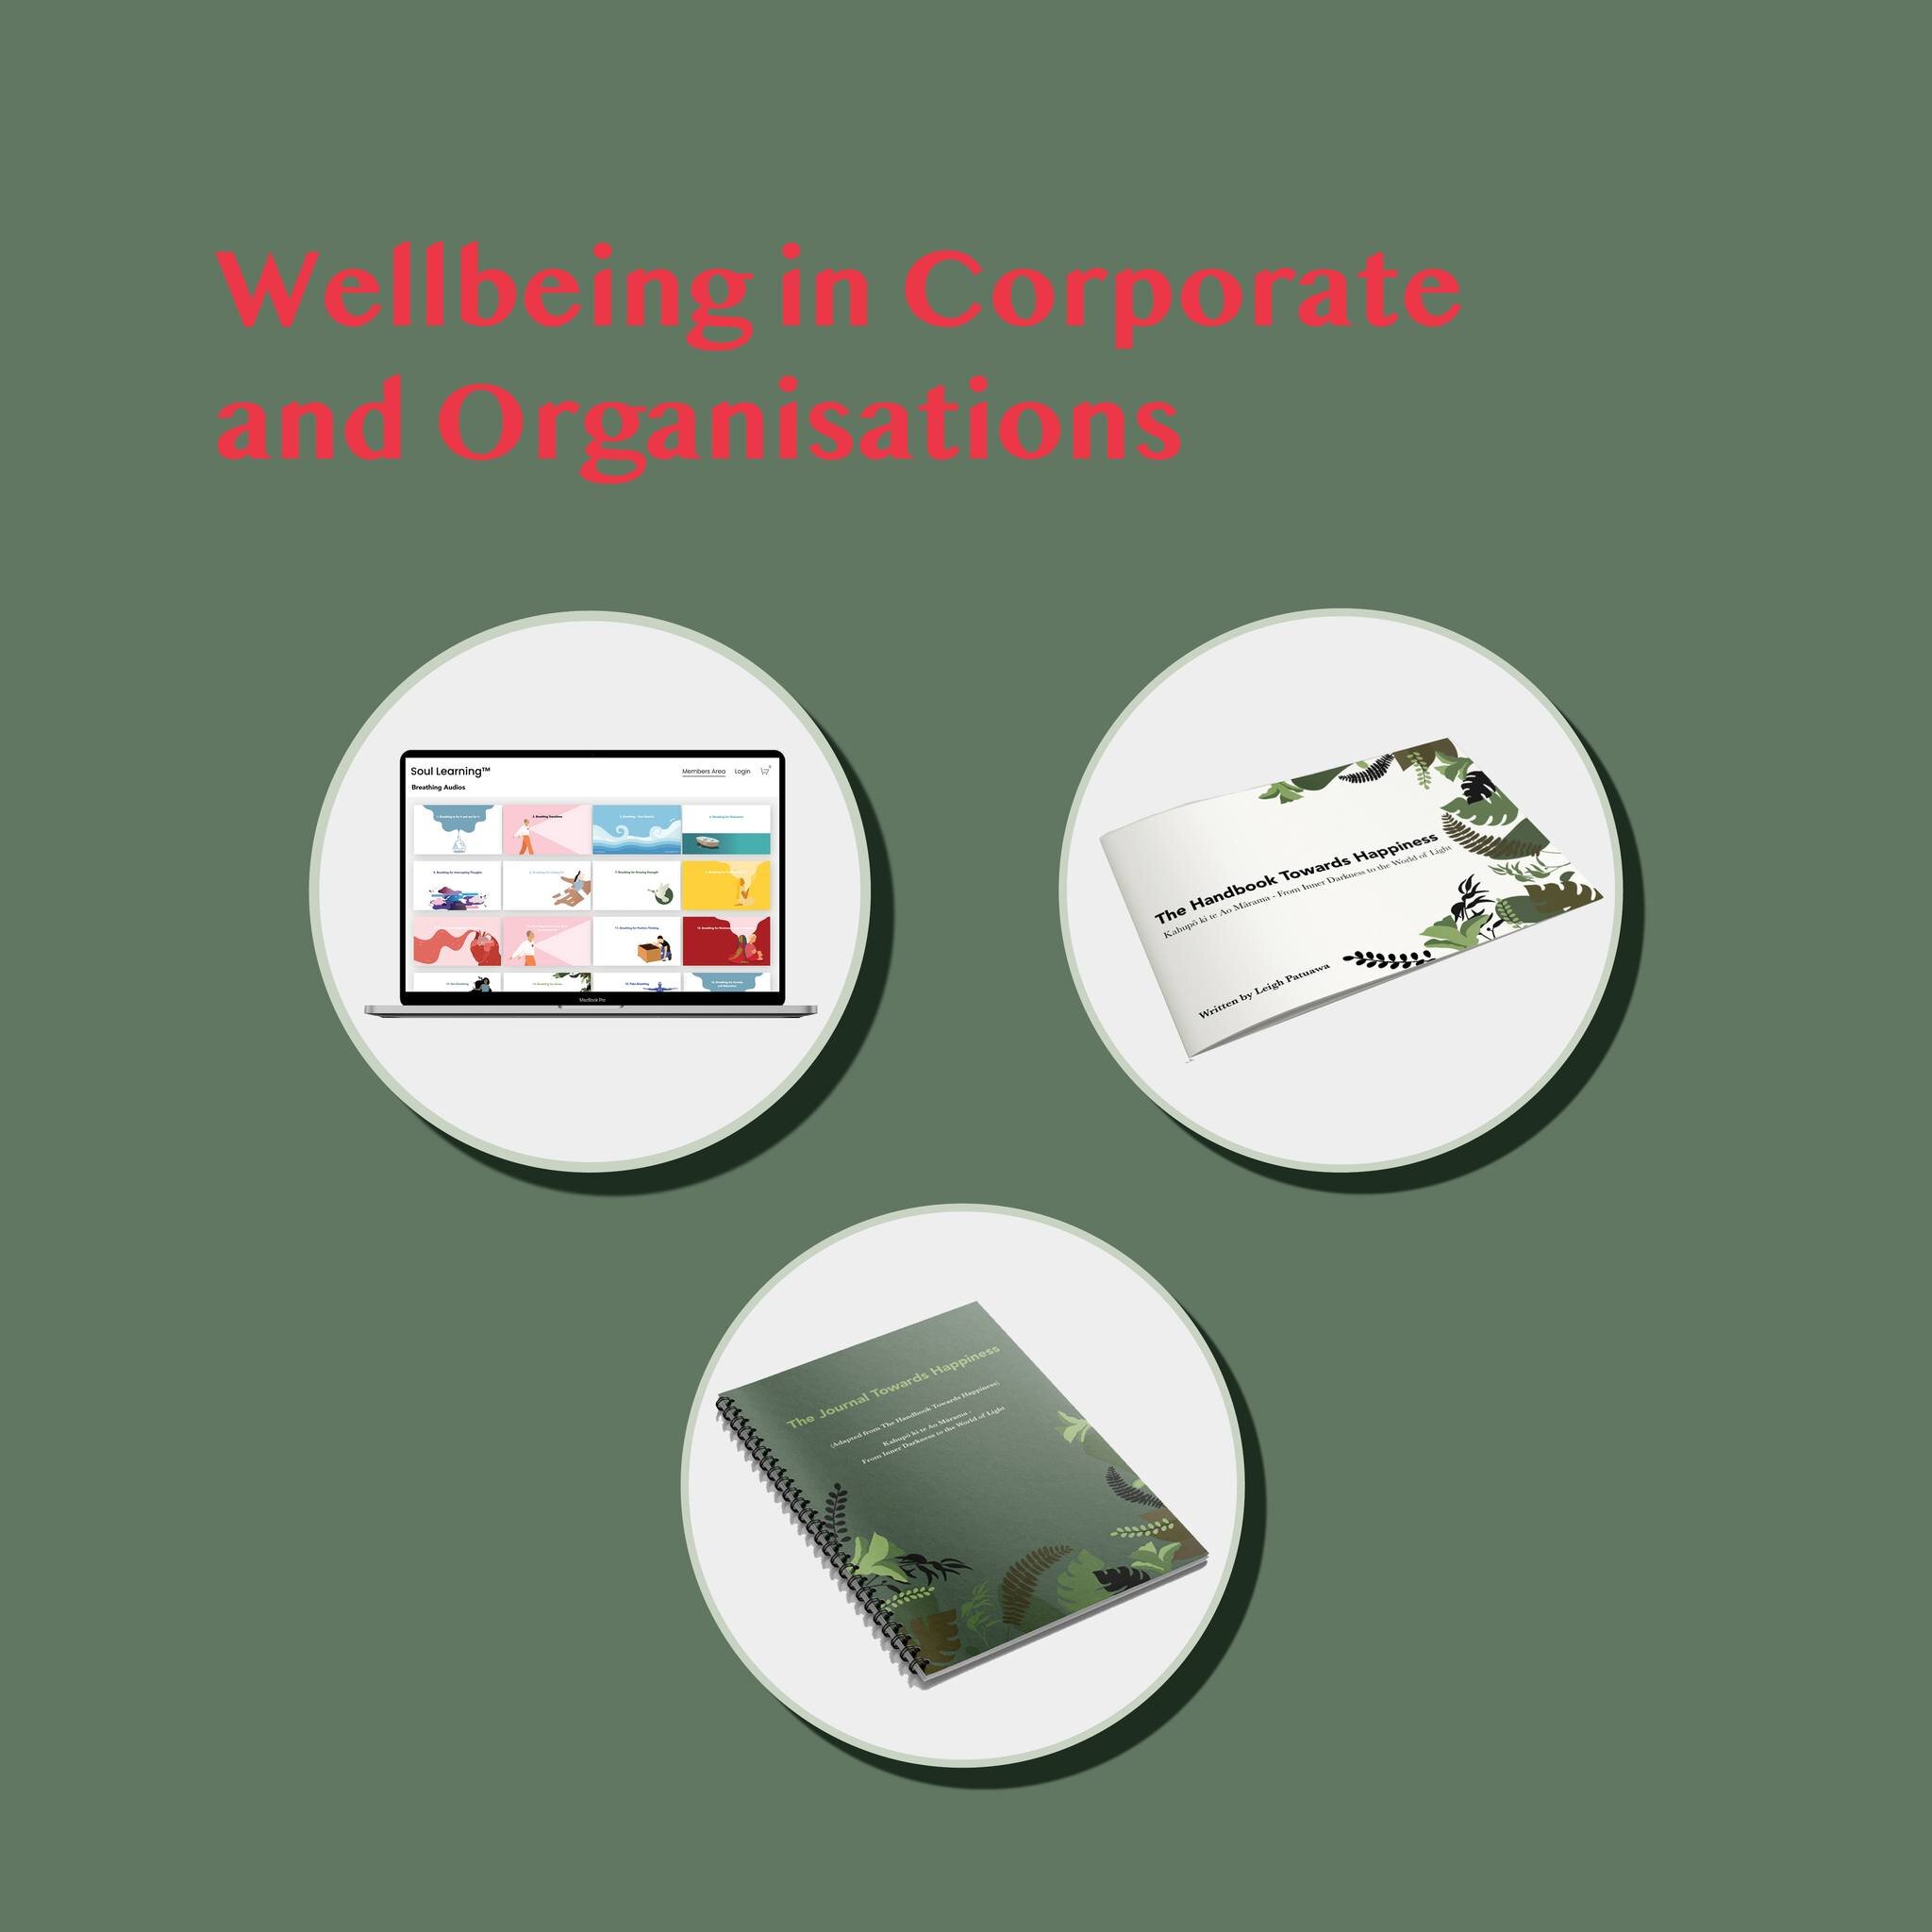 Wellbeing for Corporate and Organisations is available on our website www.soullearning.co.nz.